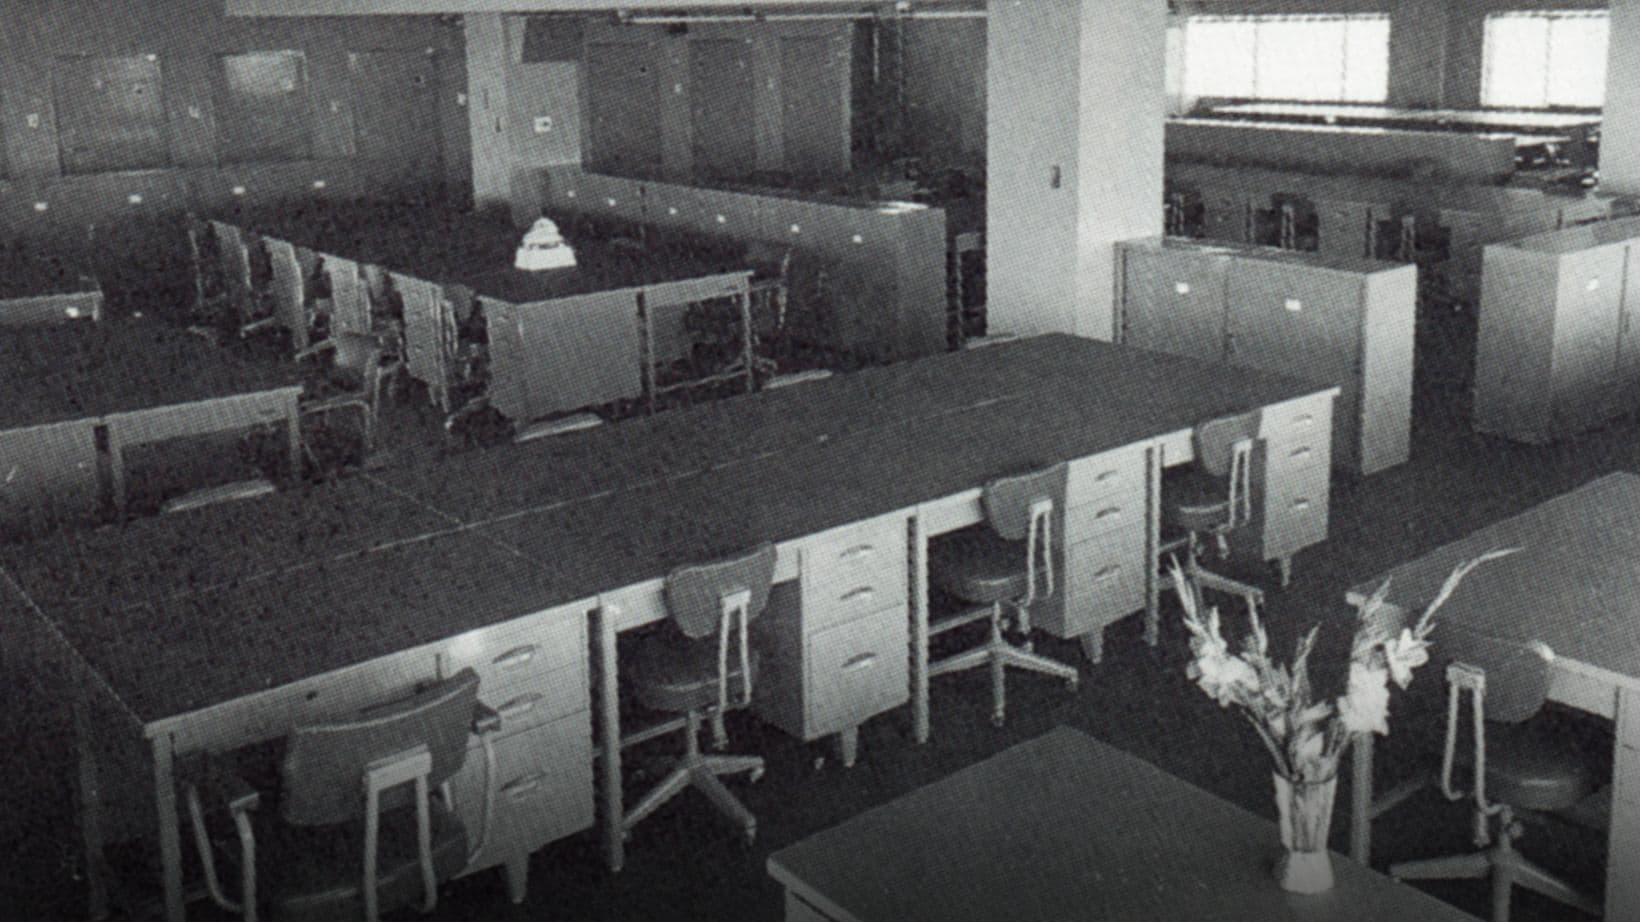 Steel furniture and good systems that created the modern office